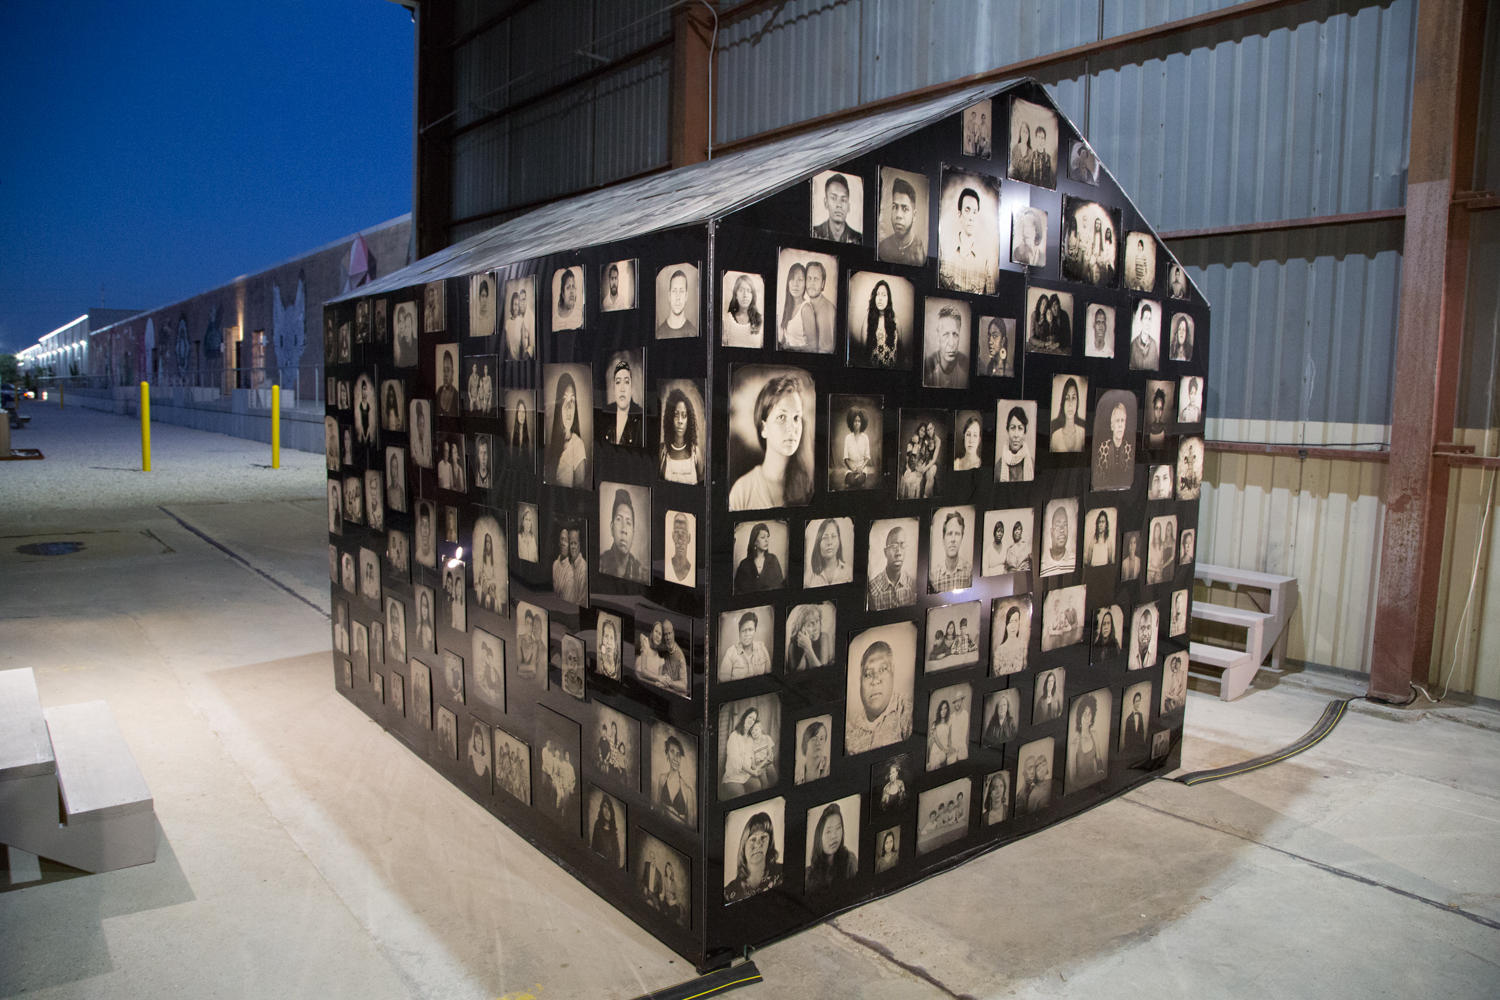 Shelter in Place, as installed at SITE Gallery, Houston, TX